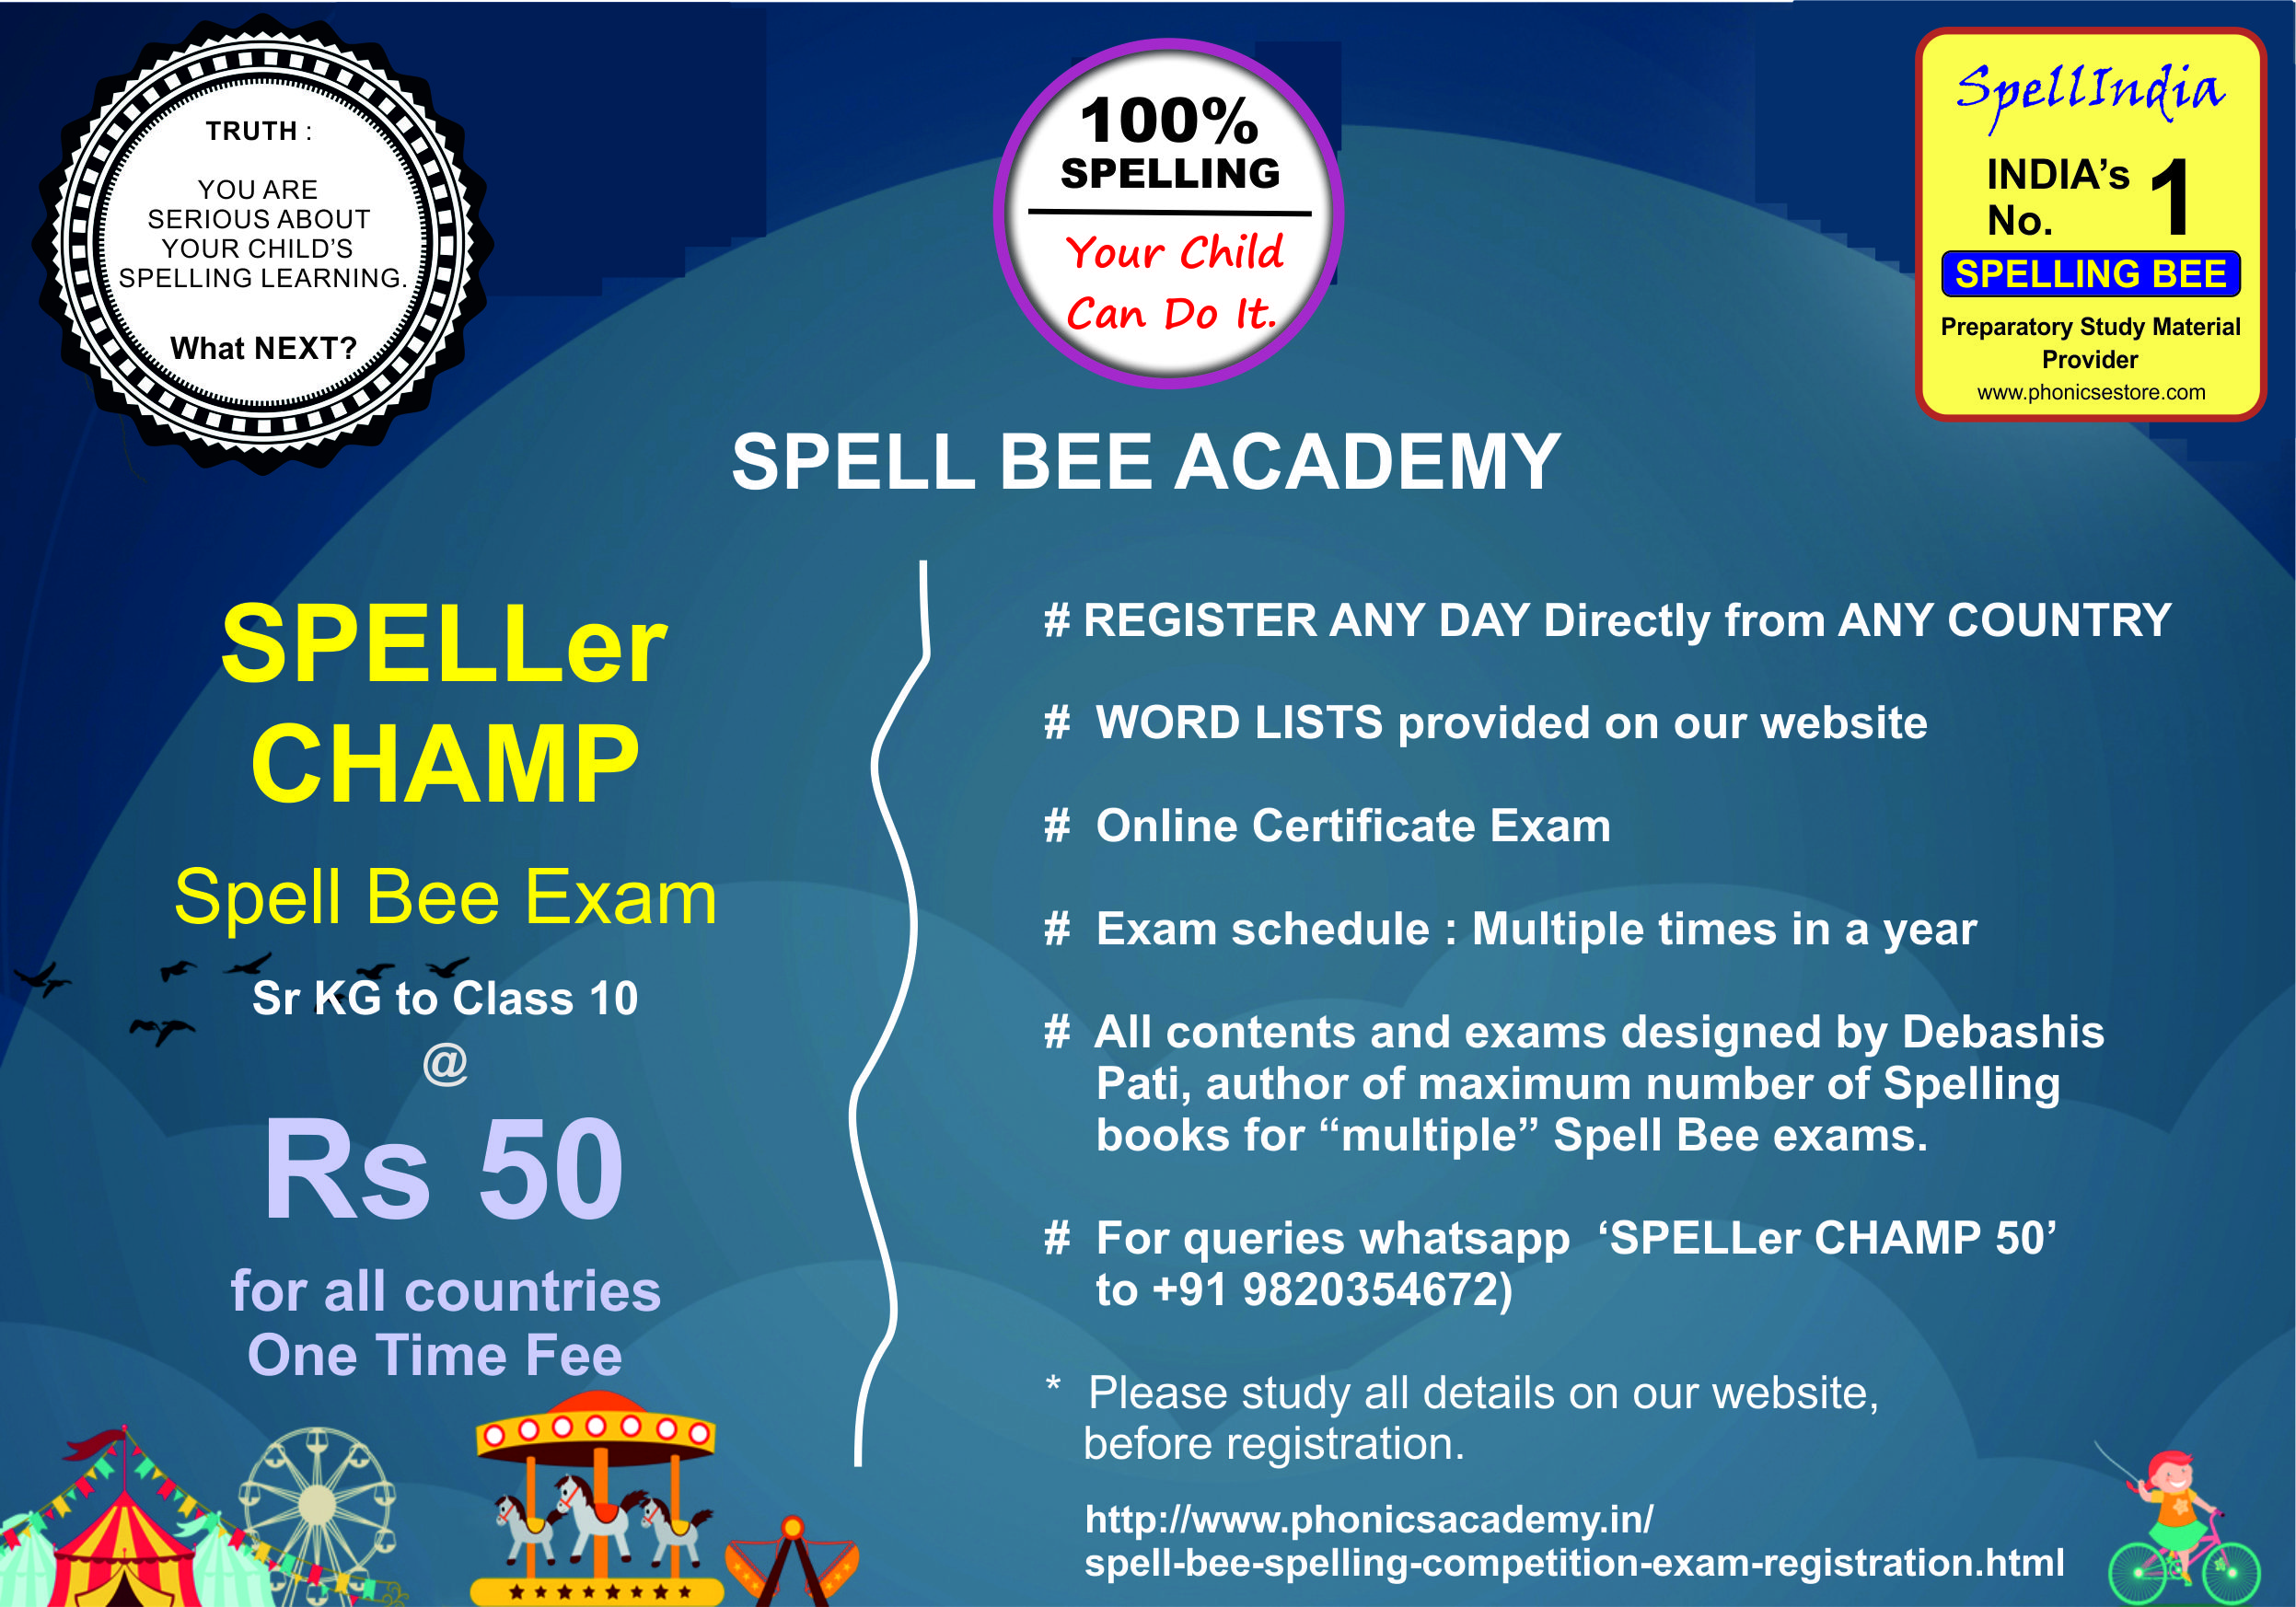 How to Register for Spell Bee Competition Spelling exam